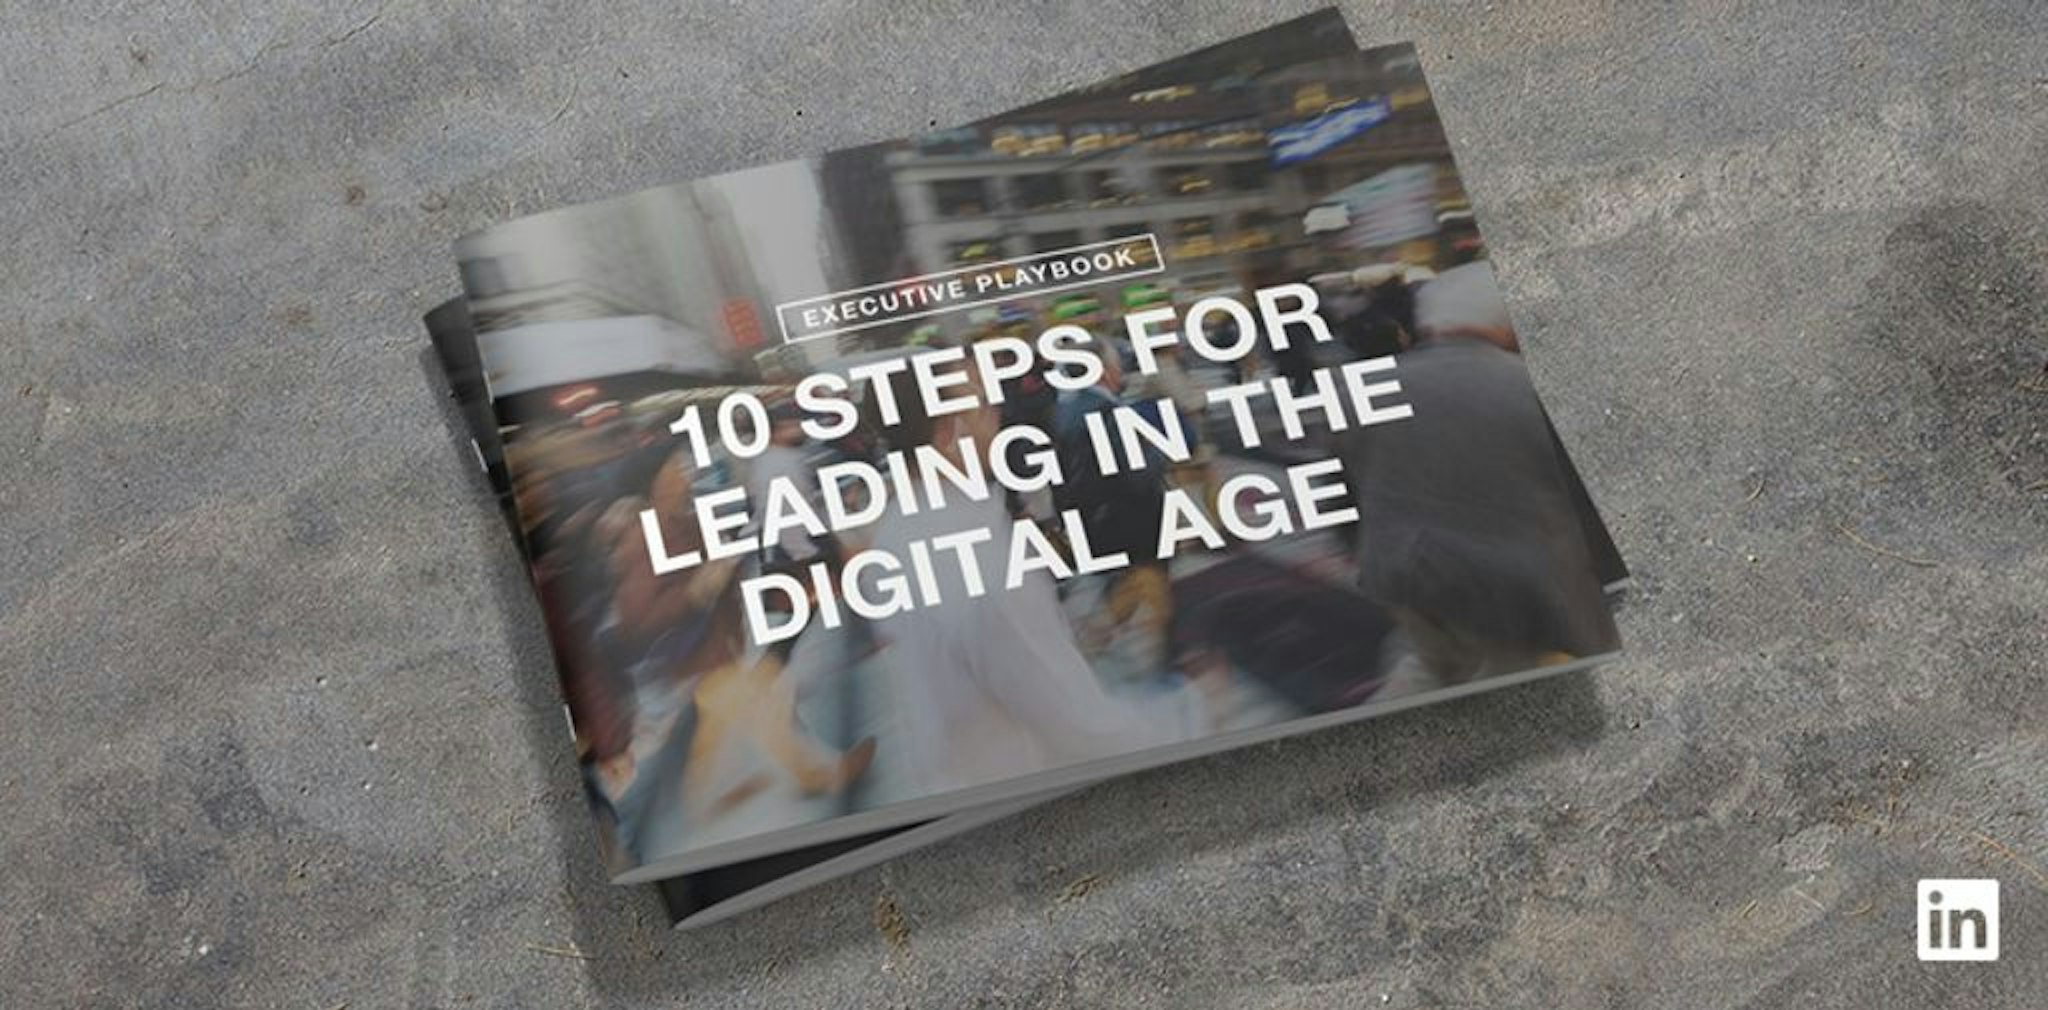 10 steps for leading the digital age playbook